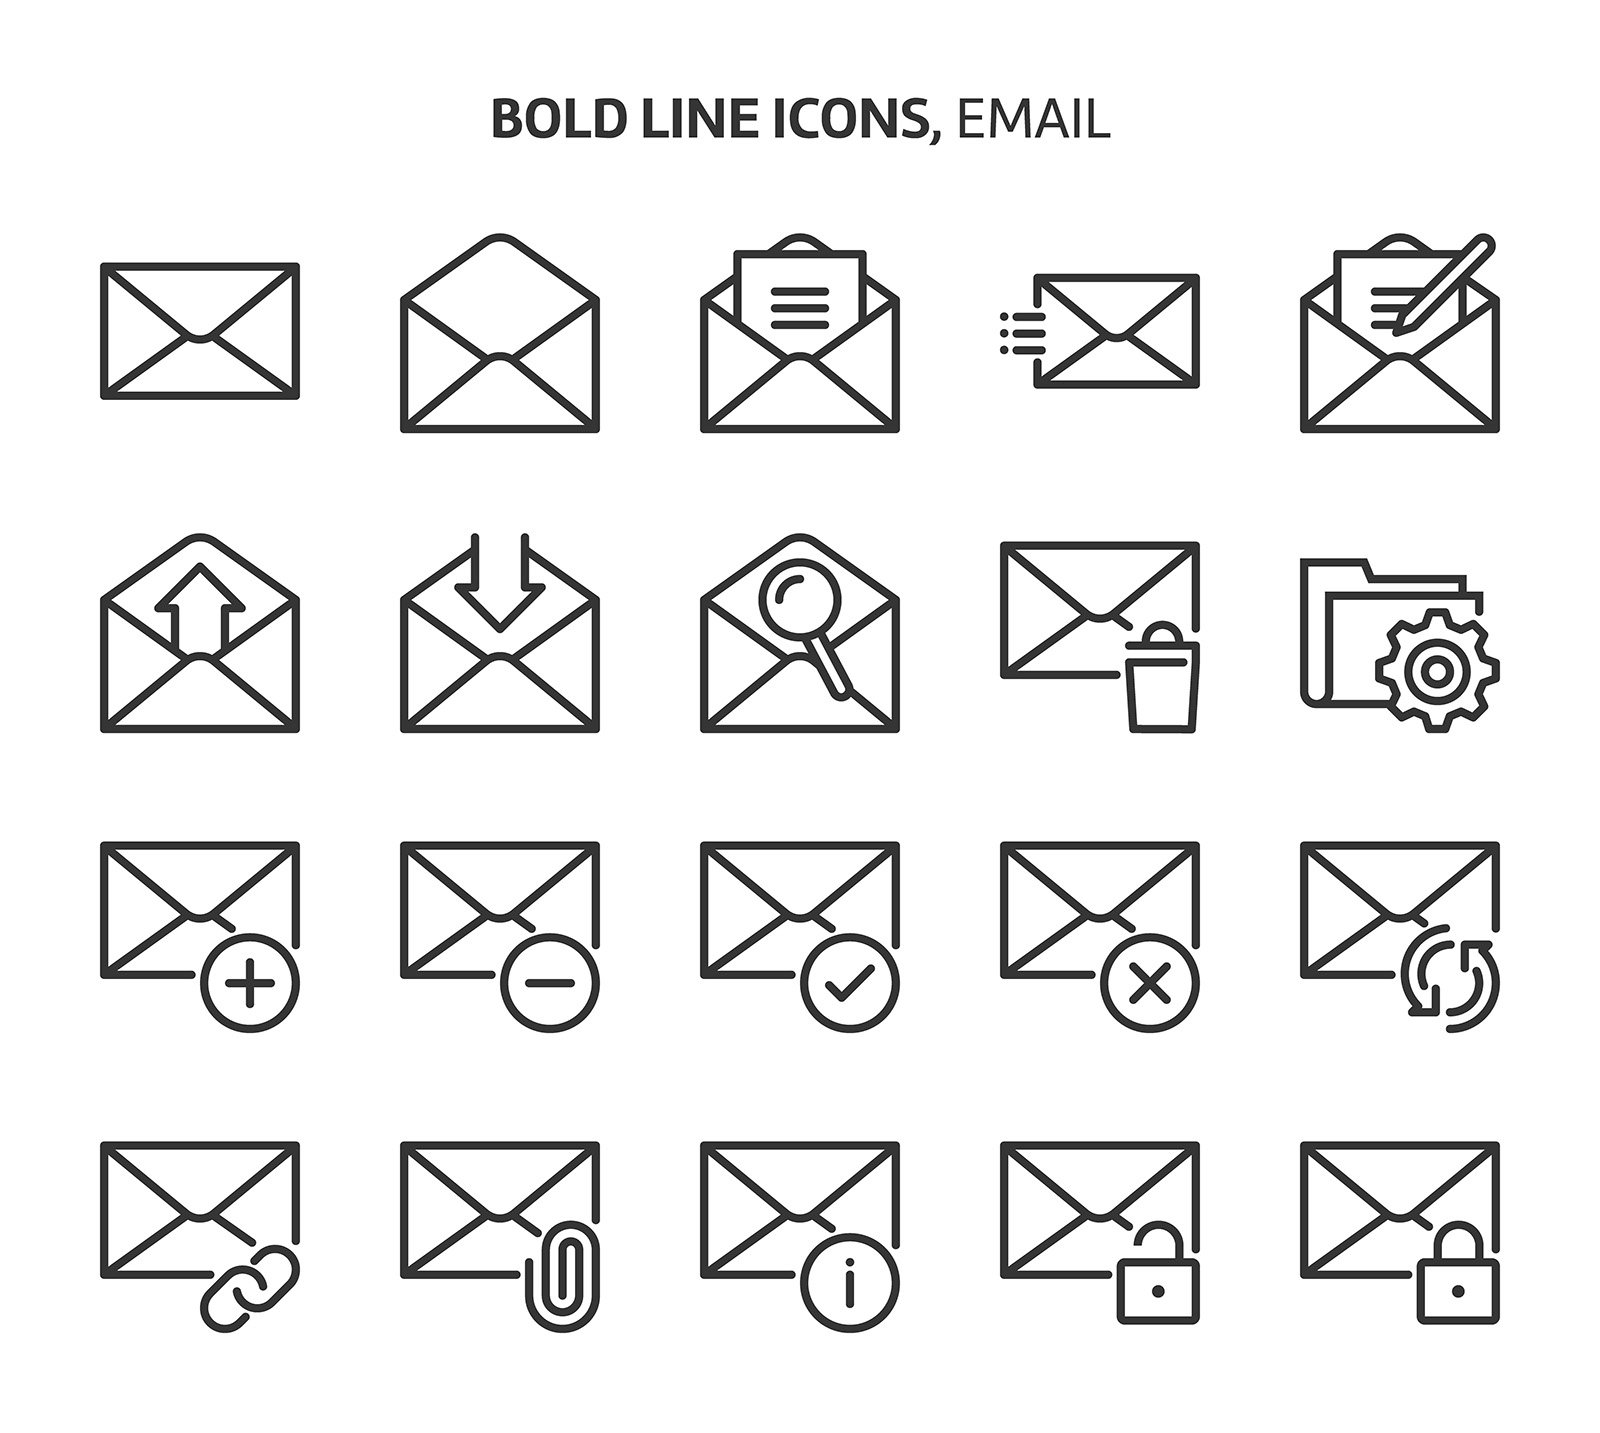 Email, bold line icons cover image.